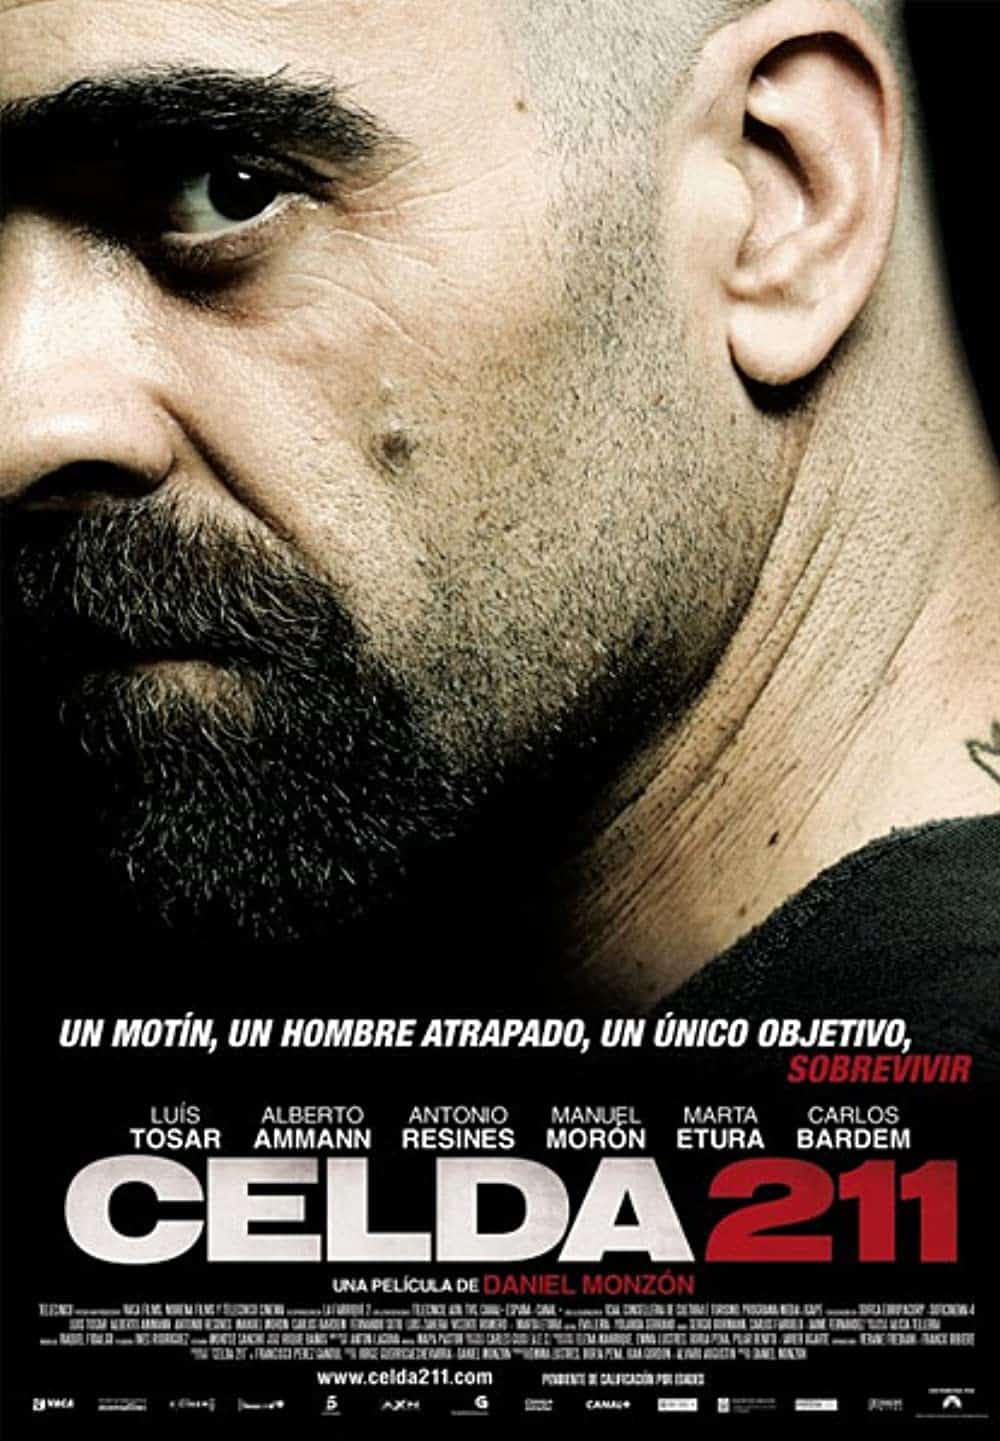 Best Prison Movies You Can't Miss Celda 211 (2009)